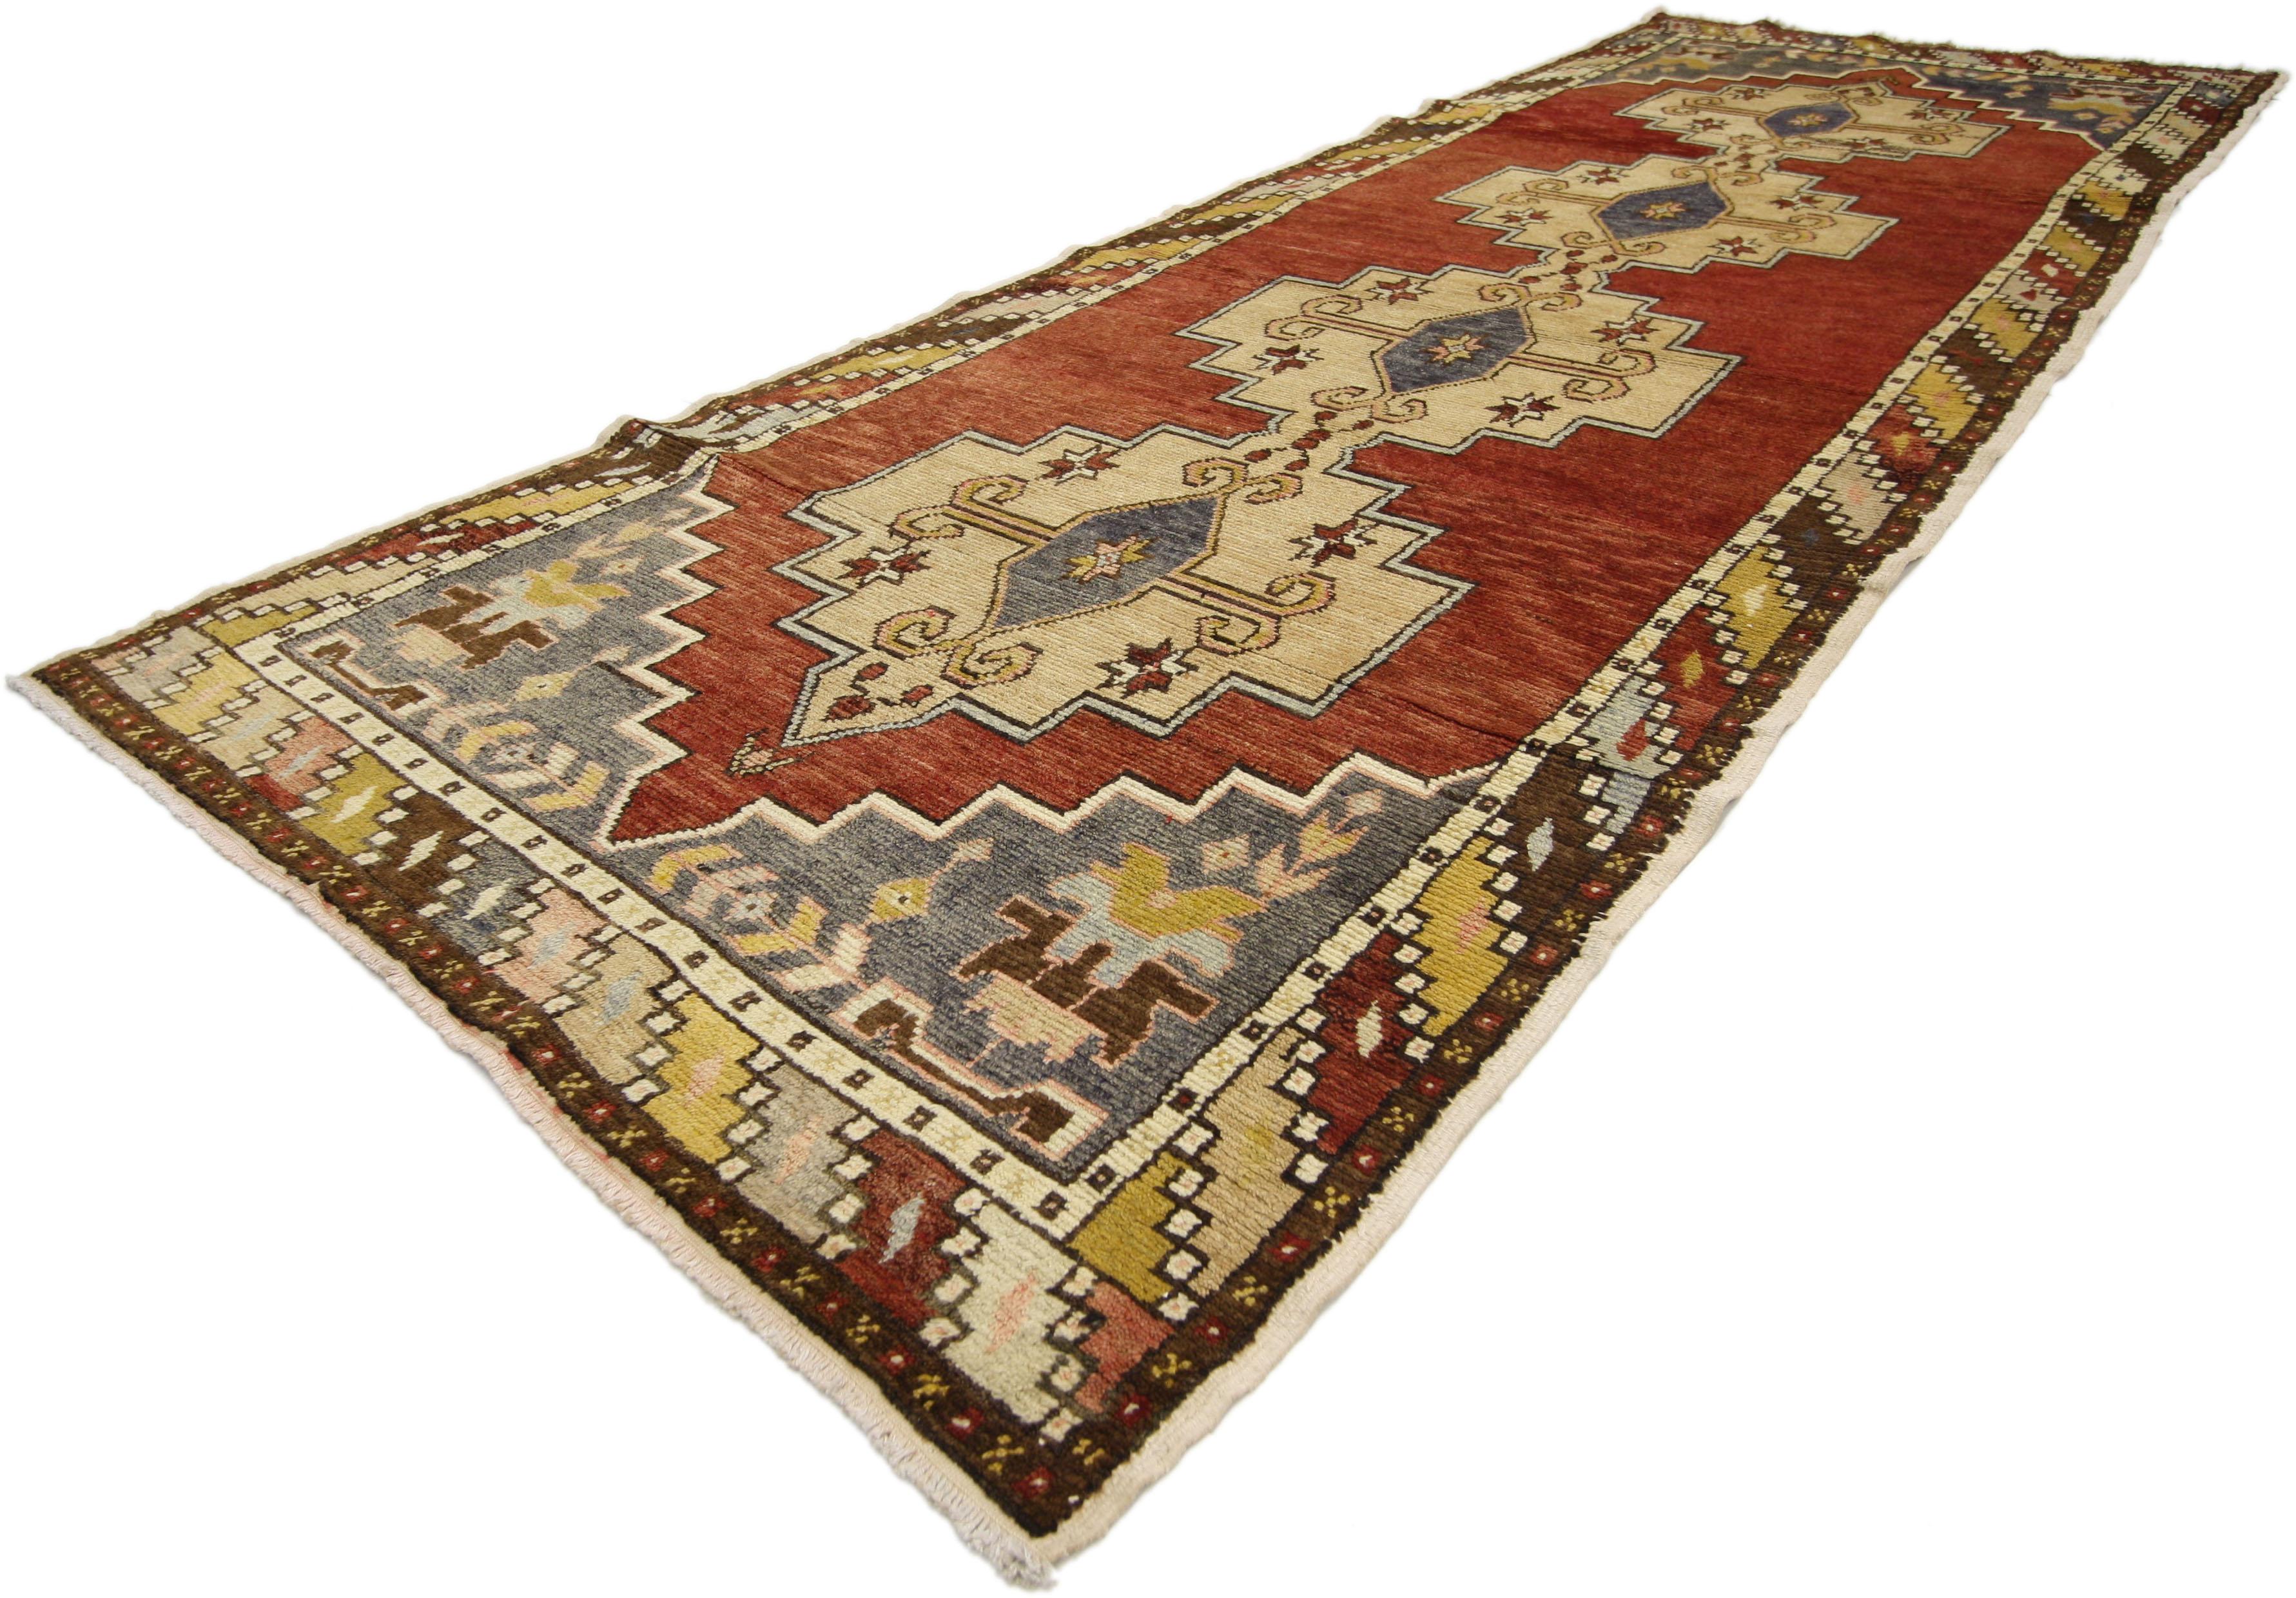 50179 Vintage Turkish Oushak Runner with Mid-Century Modern Style. This hand-knotted wool vintage Turkish Oushak runner features four large gul amulets patterned with diamonds, Ram's Horn, and eight-point stars. Each corner spandrel is filled with